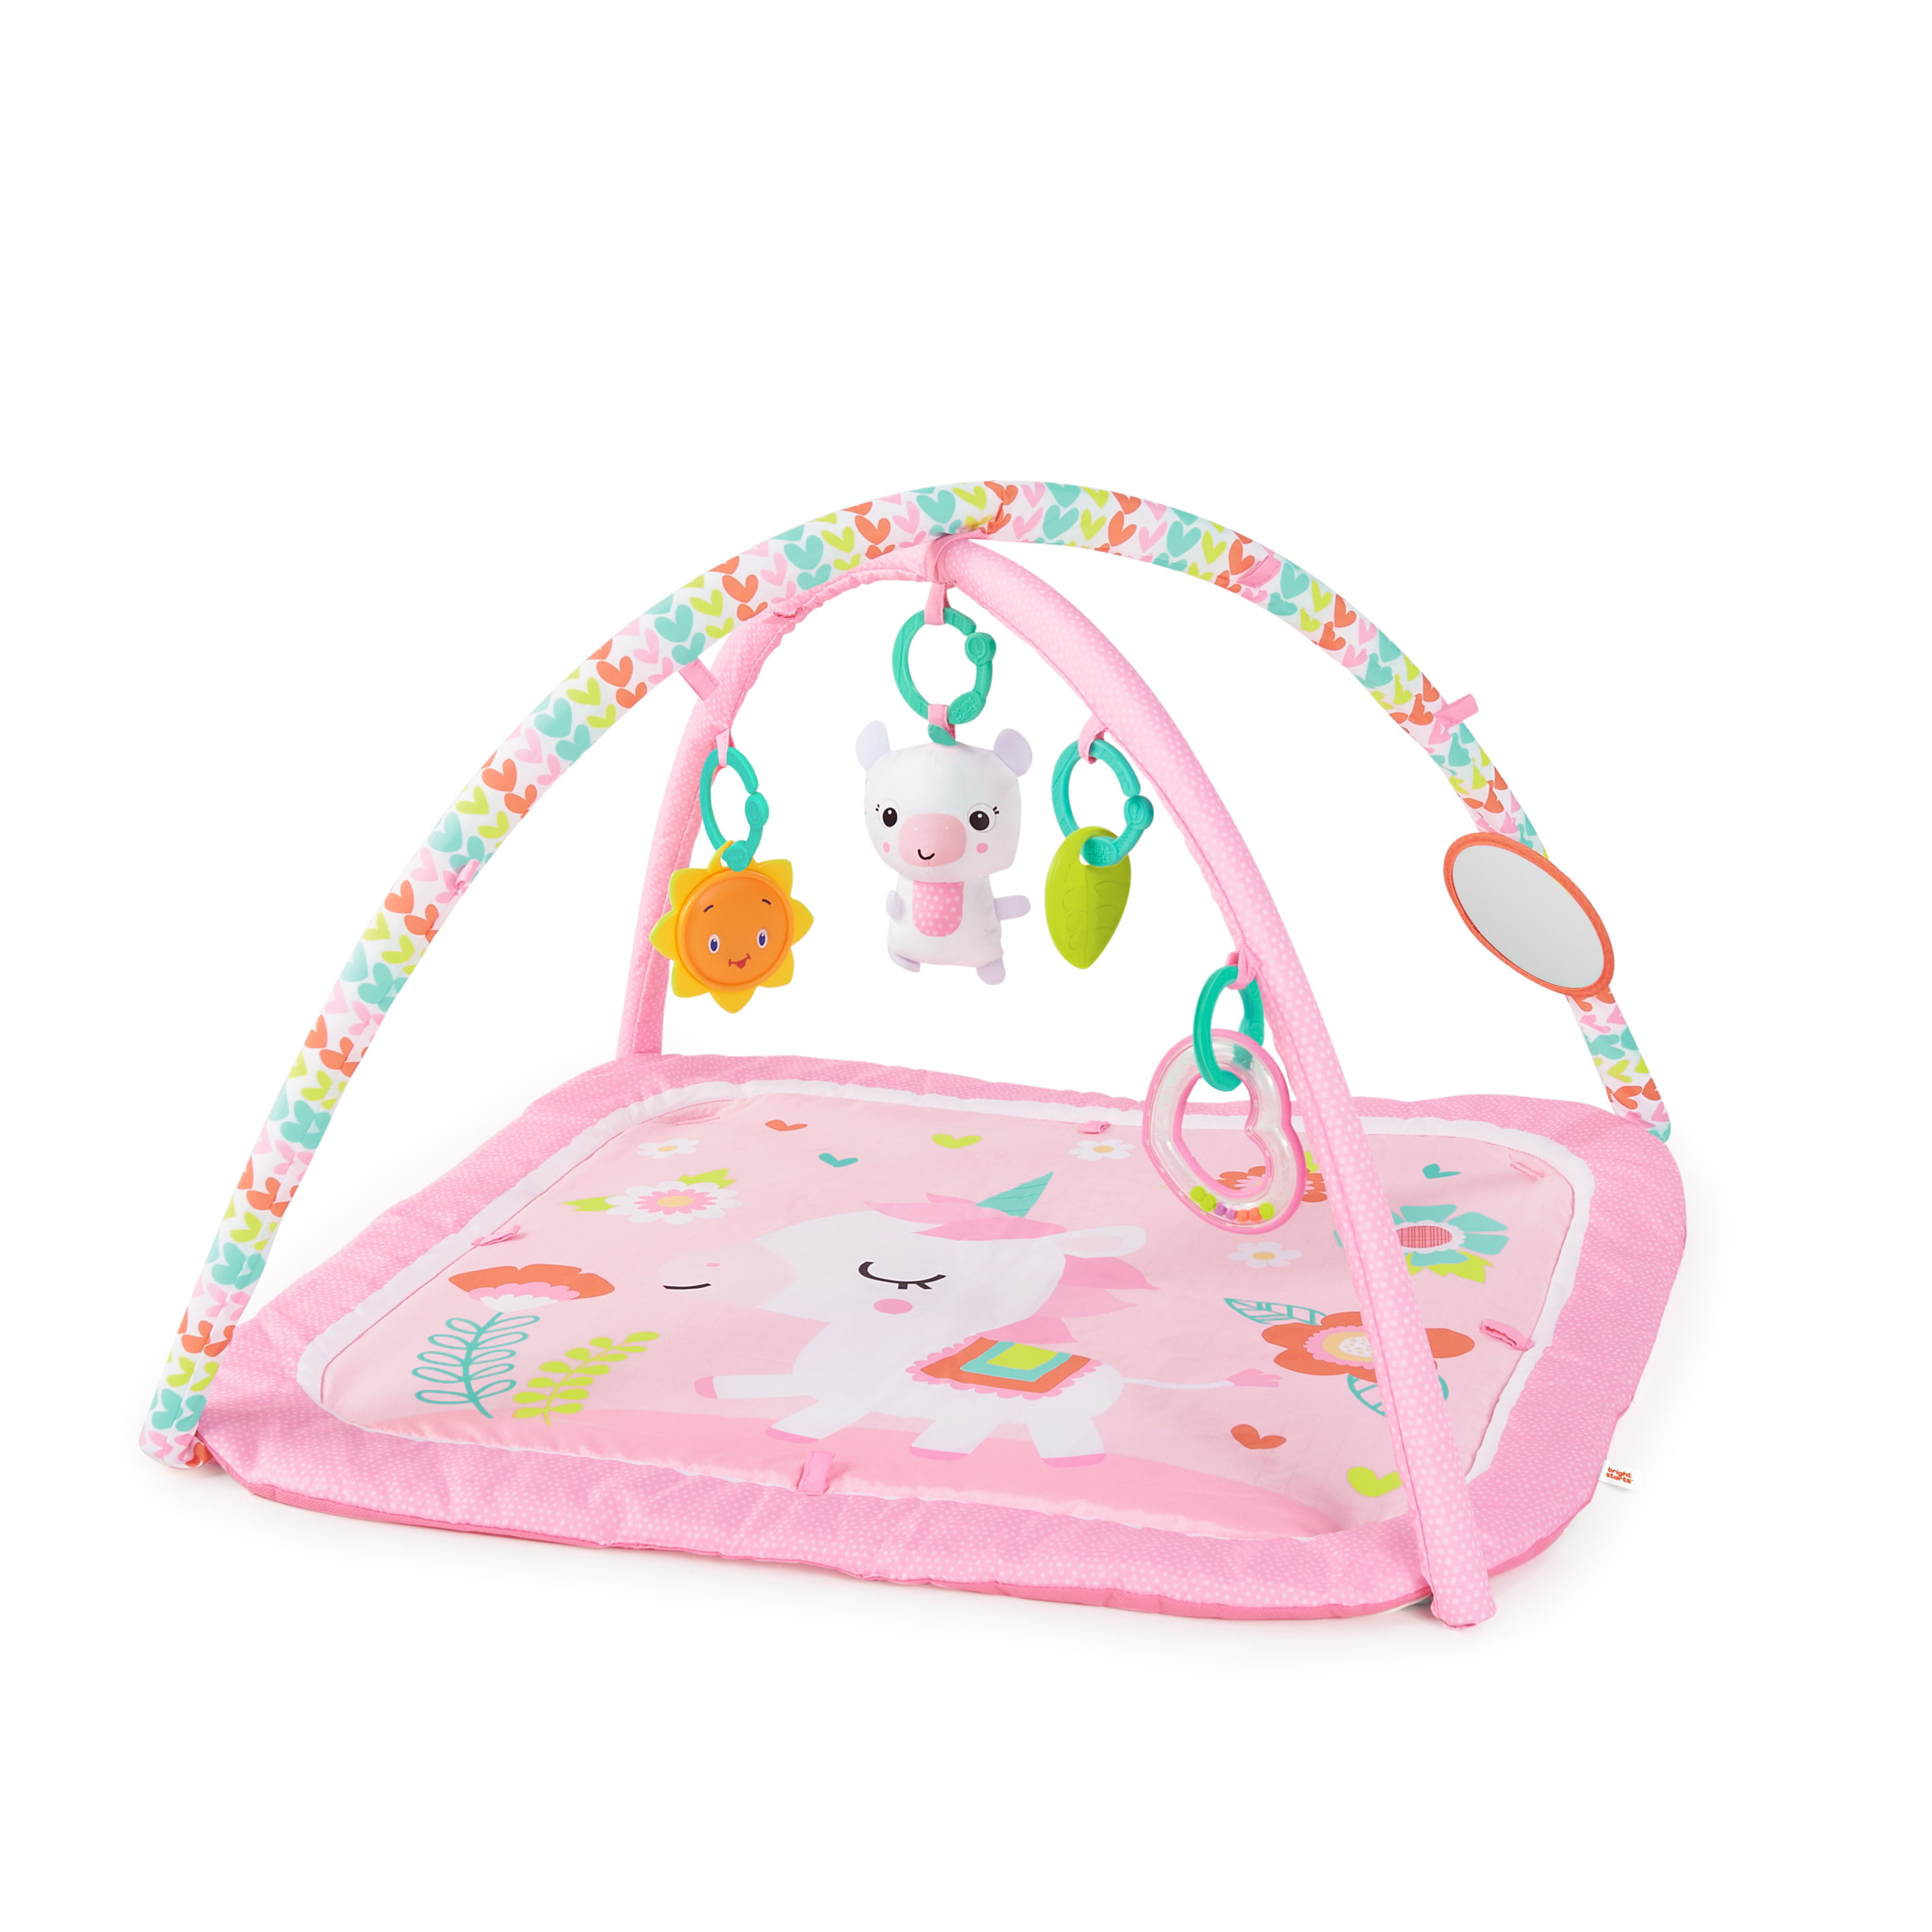 Ages Newborn Bright Starts Daydream Blooms Activity Gym & Play Mat with Take-Along Toys